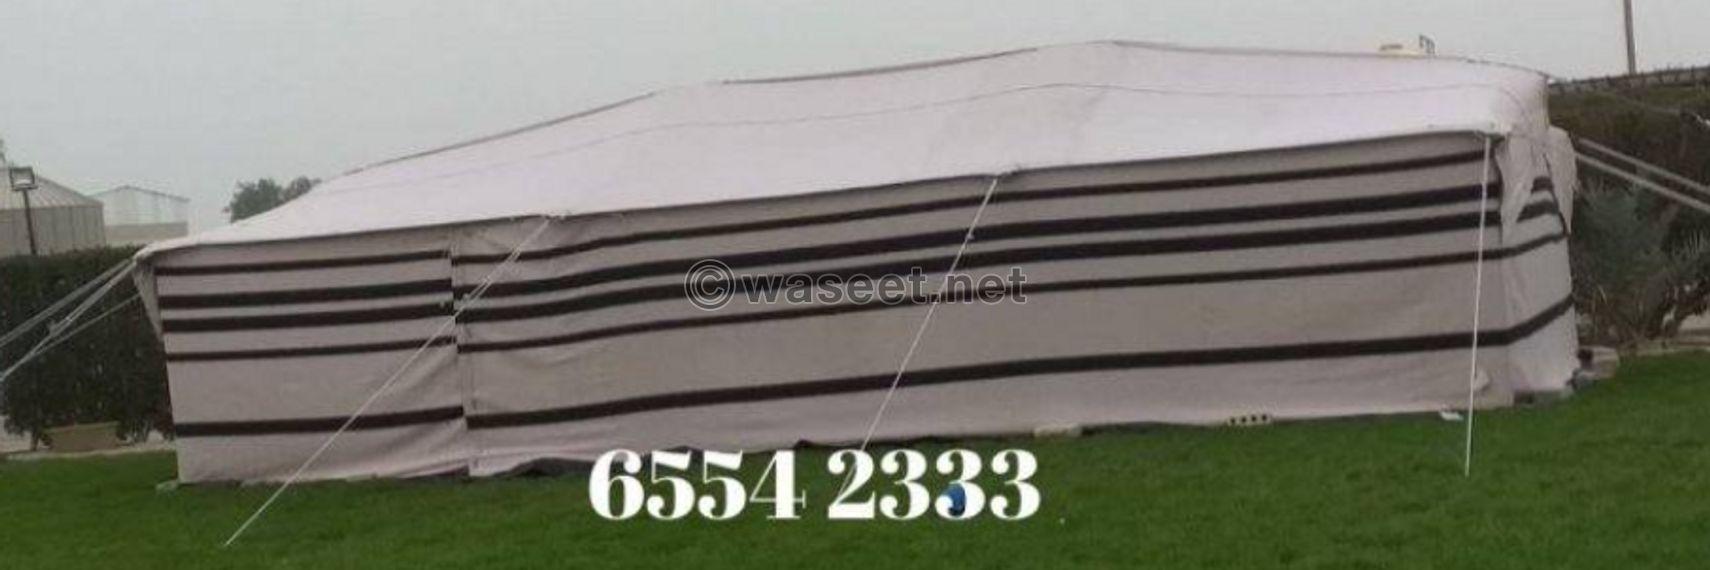 affordable tents for sale 0